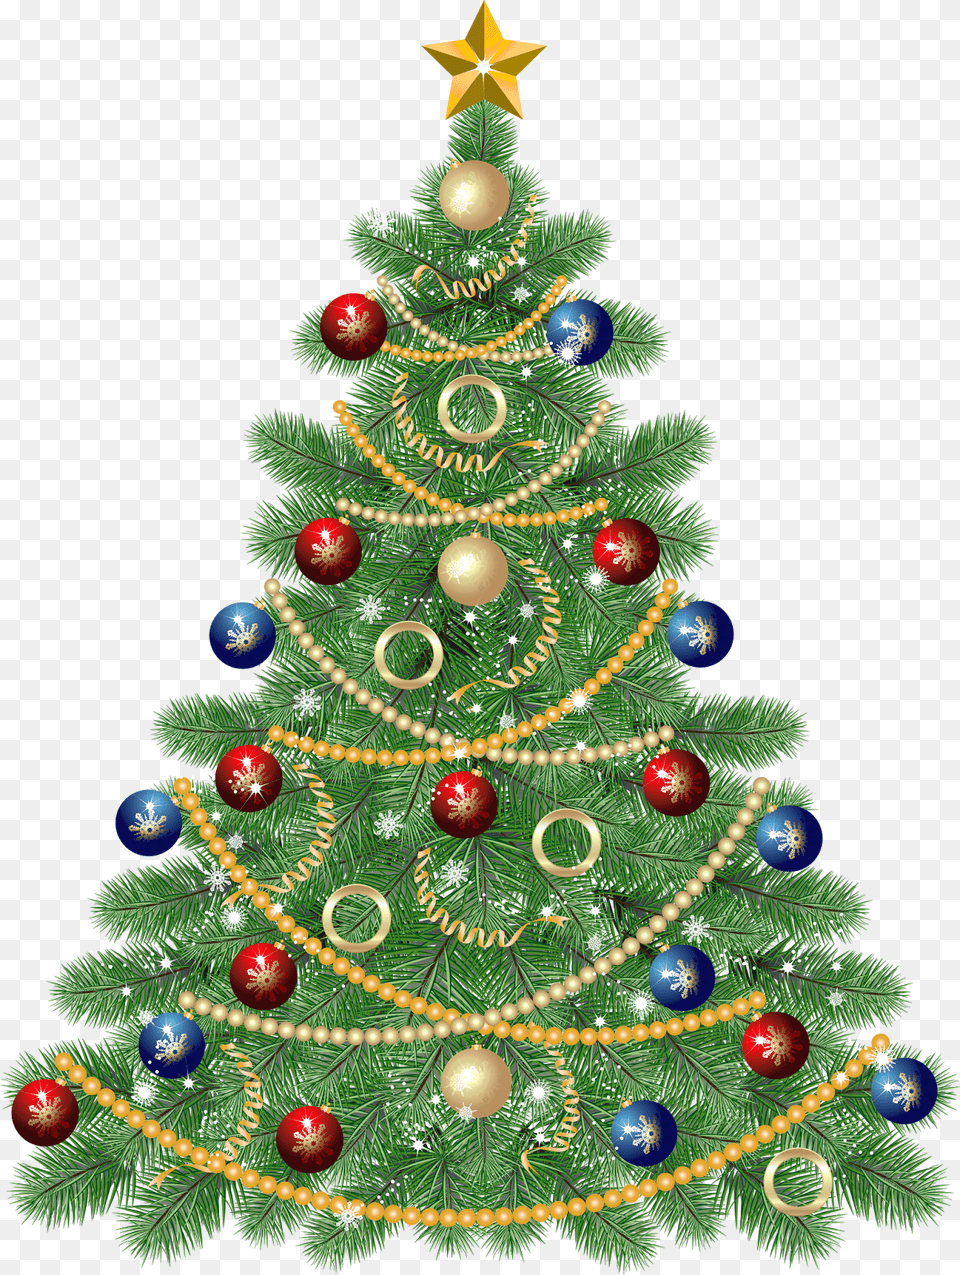 Large Christmas Tree With Clip Art Christmas Images, Plant, Christmas Decorations, Festival, Christmas Tree Png Image